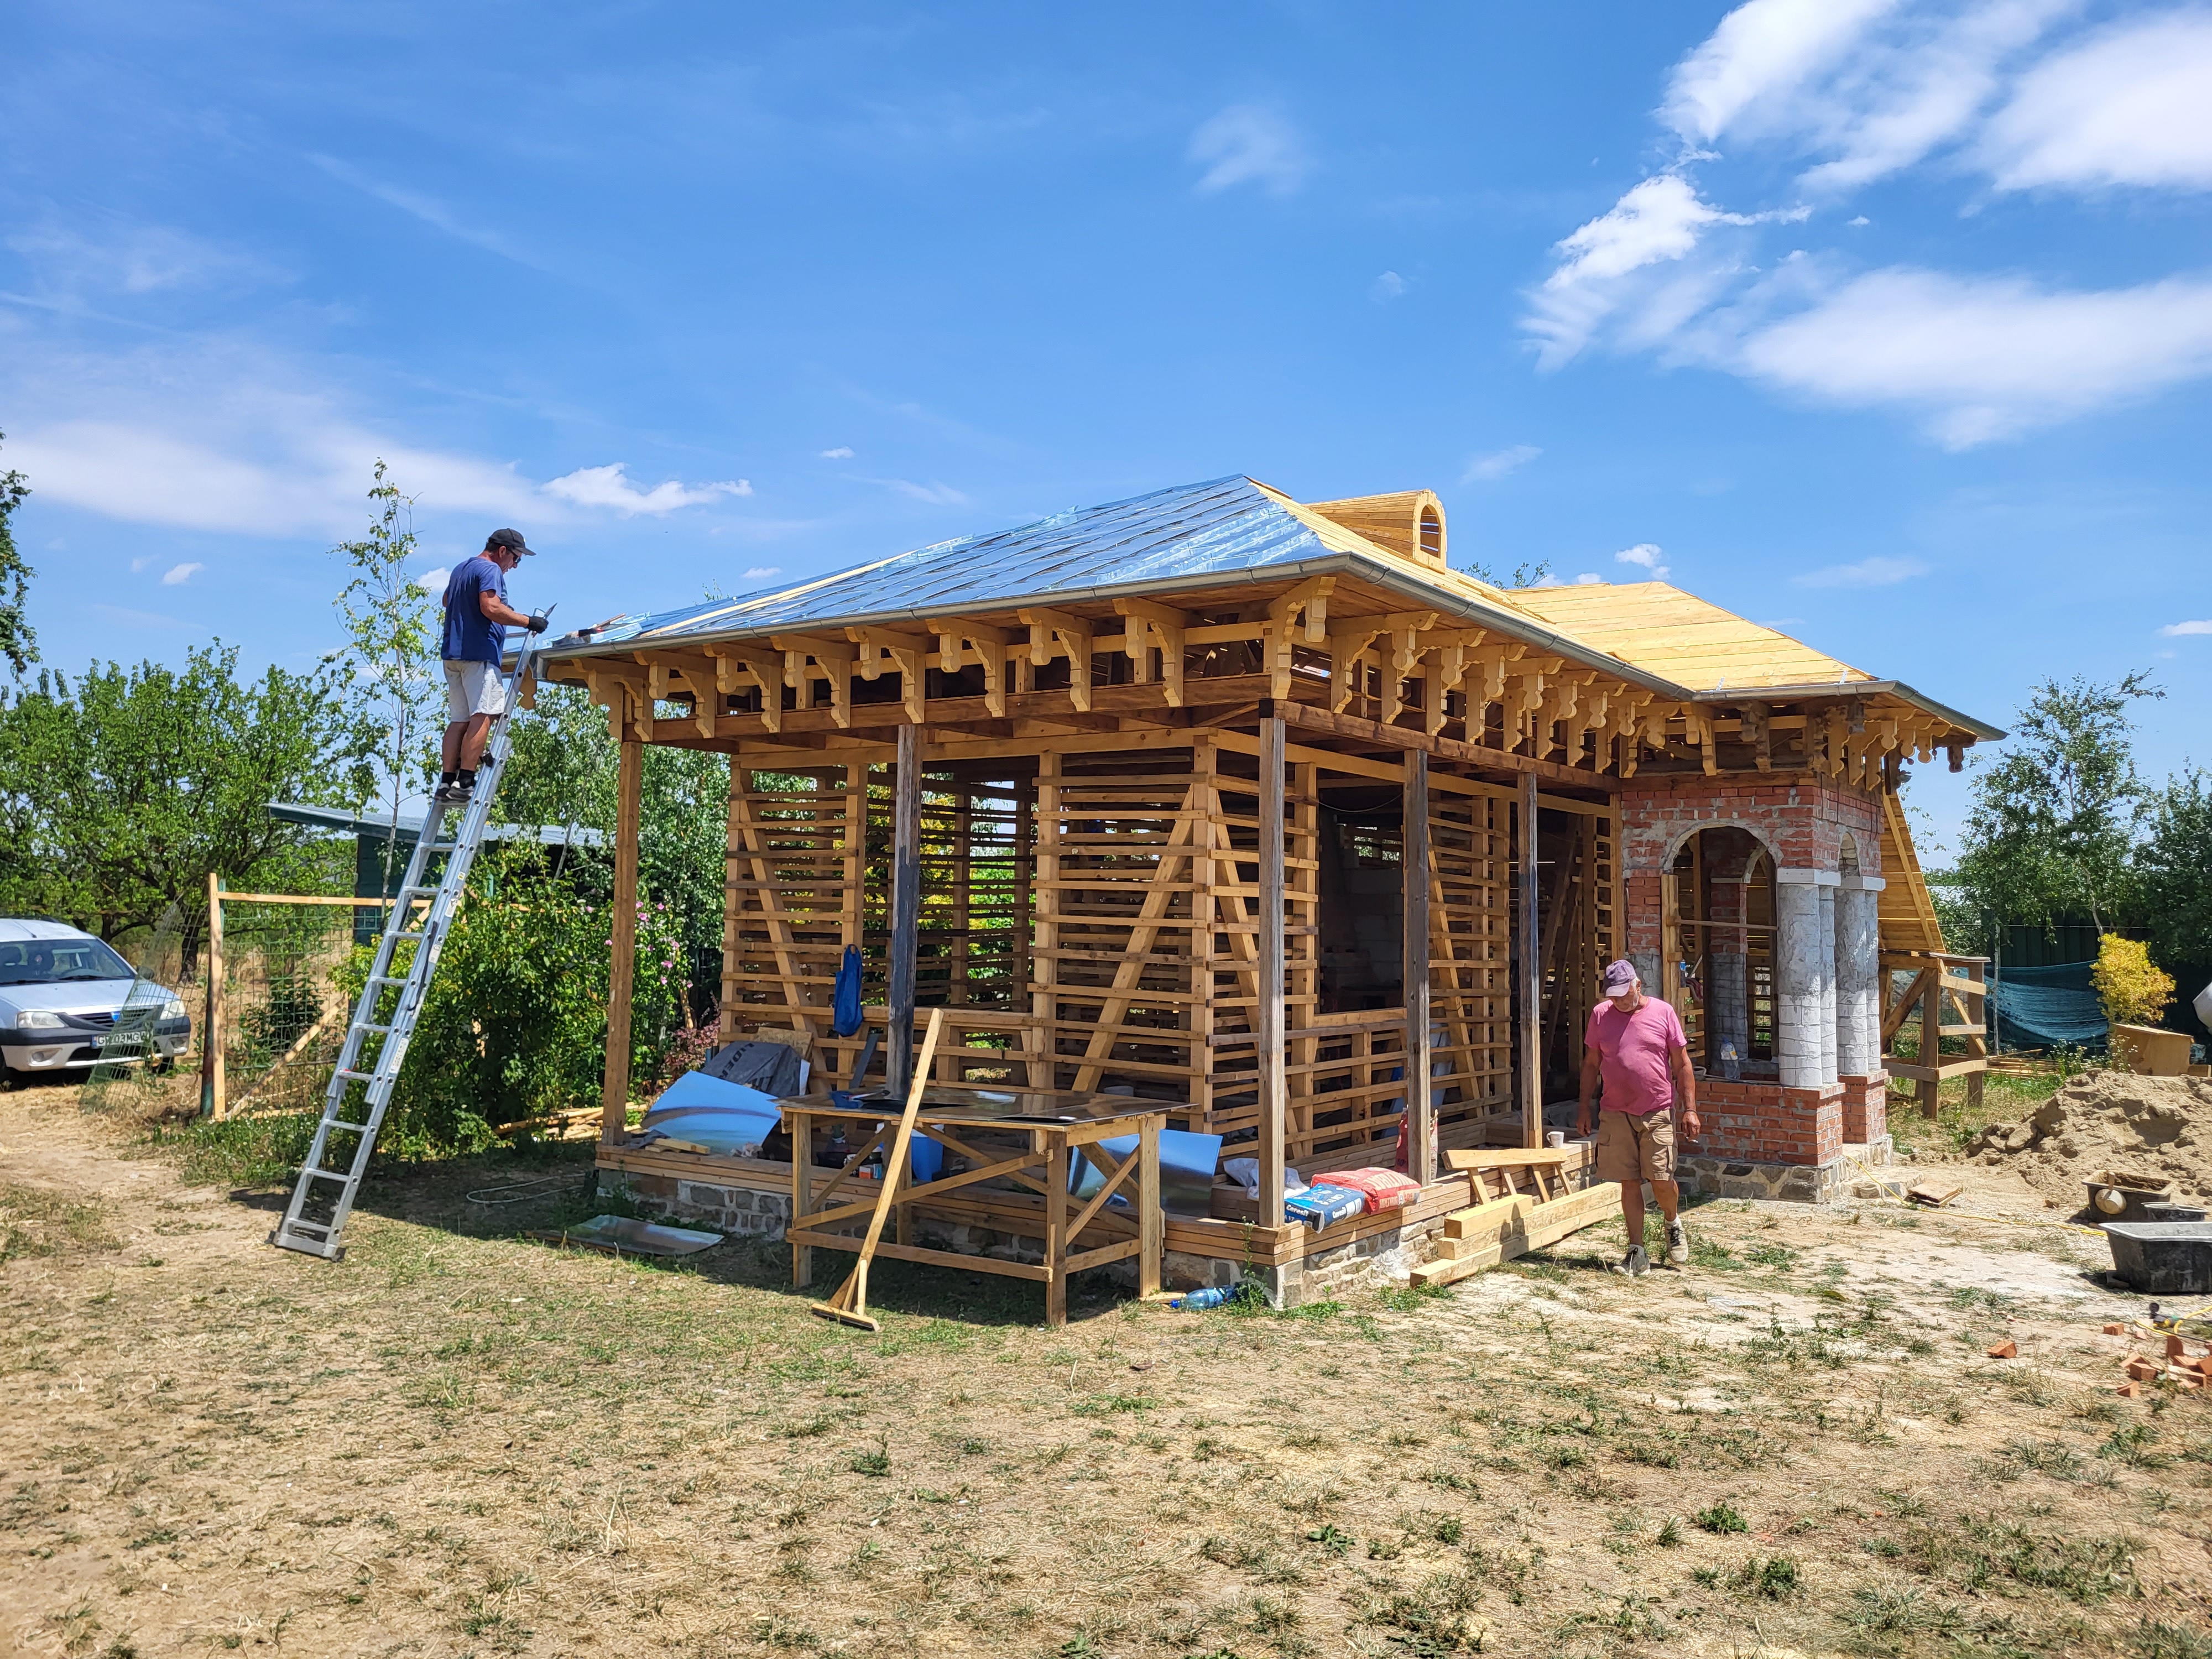 Southern Romania: House with historical value relocated, restored with the help of volunteers